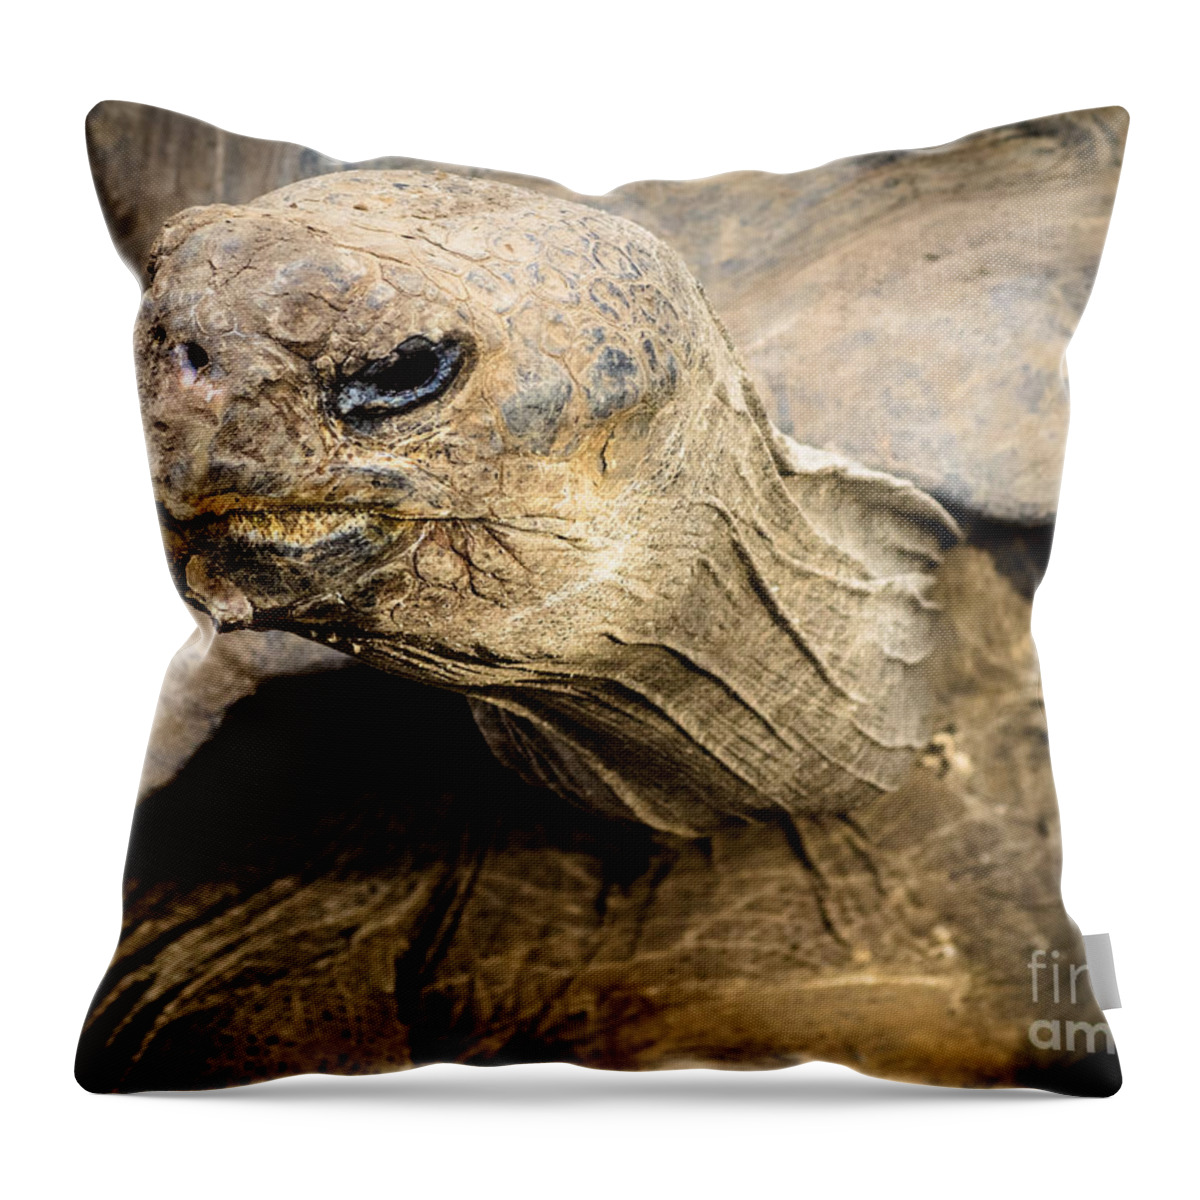 Tortoise Throw Pillow featuring the photograph Tortoise by Imagery by Charly